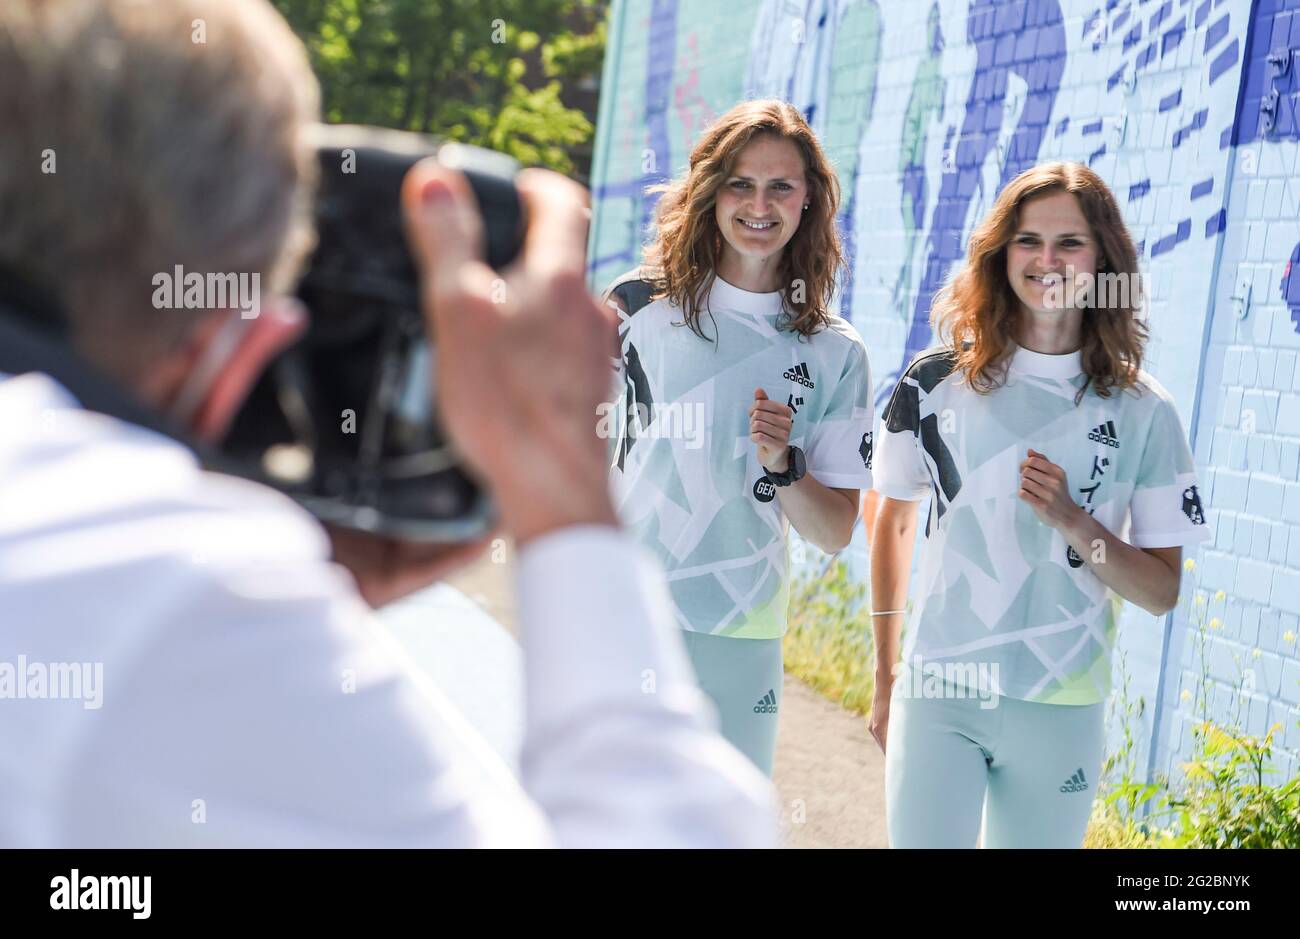 Berlin, Germany. 10th June, 2021. The twins and track and field athletes  Deborah Schöneborn (l) and Rabea Schöneborn (r) are photographed. Athletes  are dressed for the Tokyo 2021 Olympic Games at Team